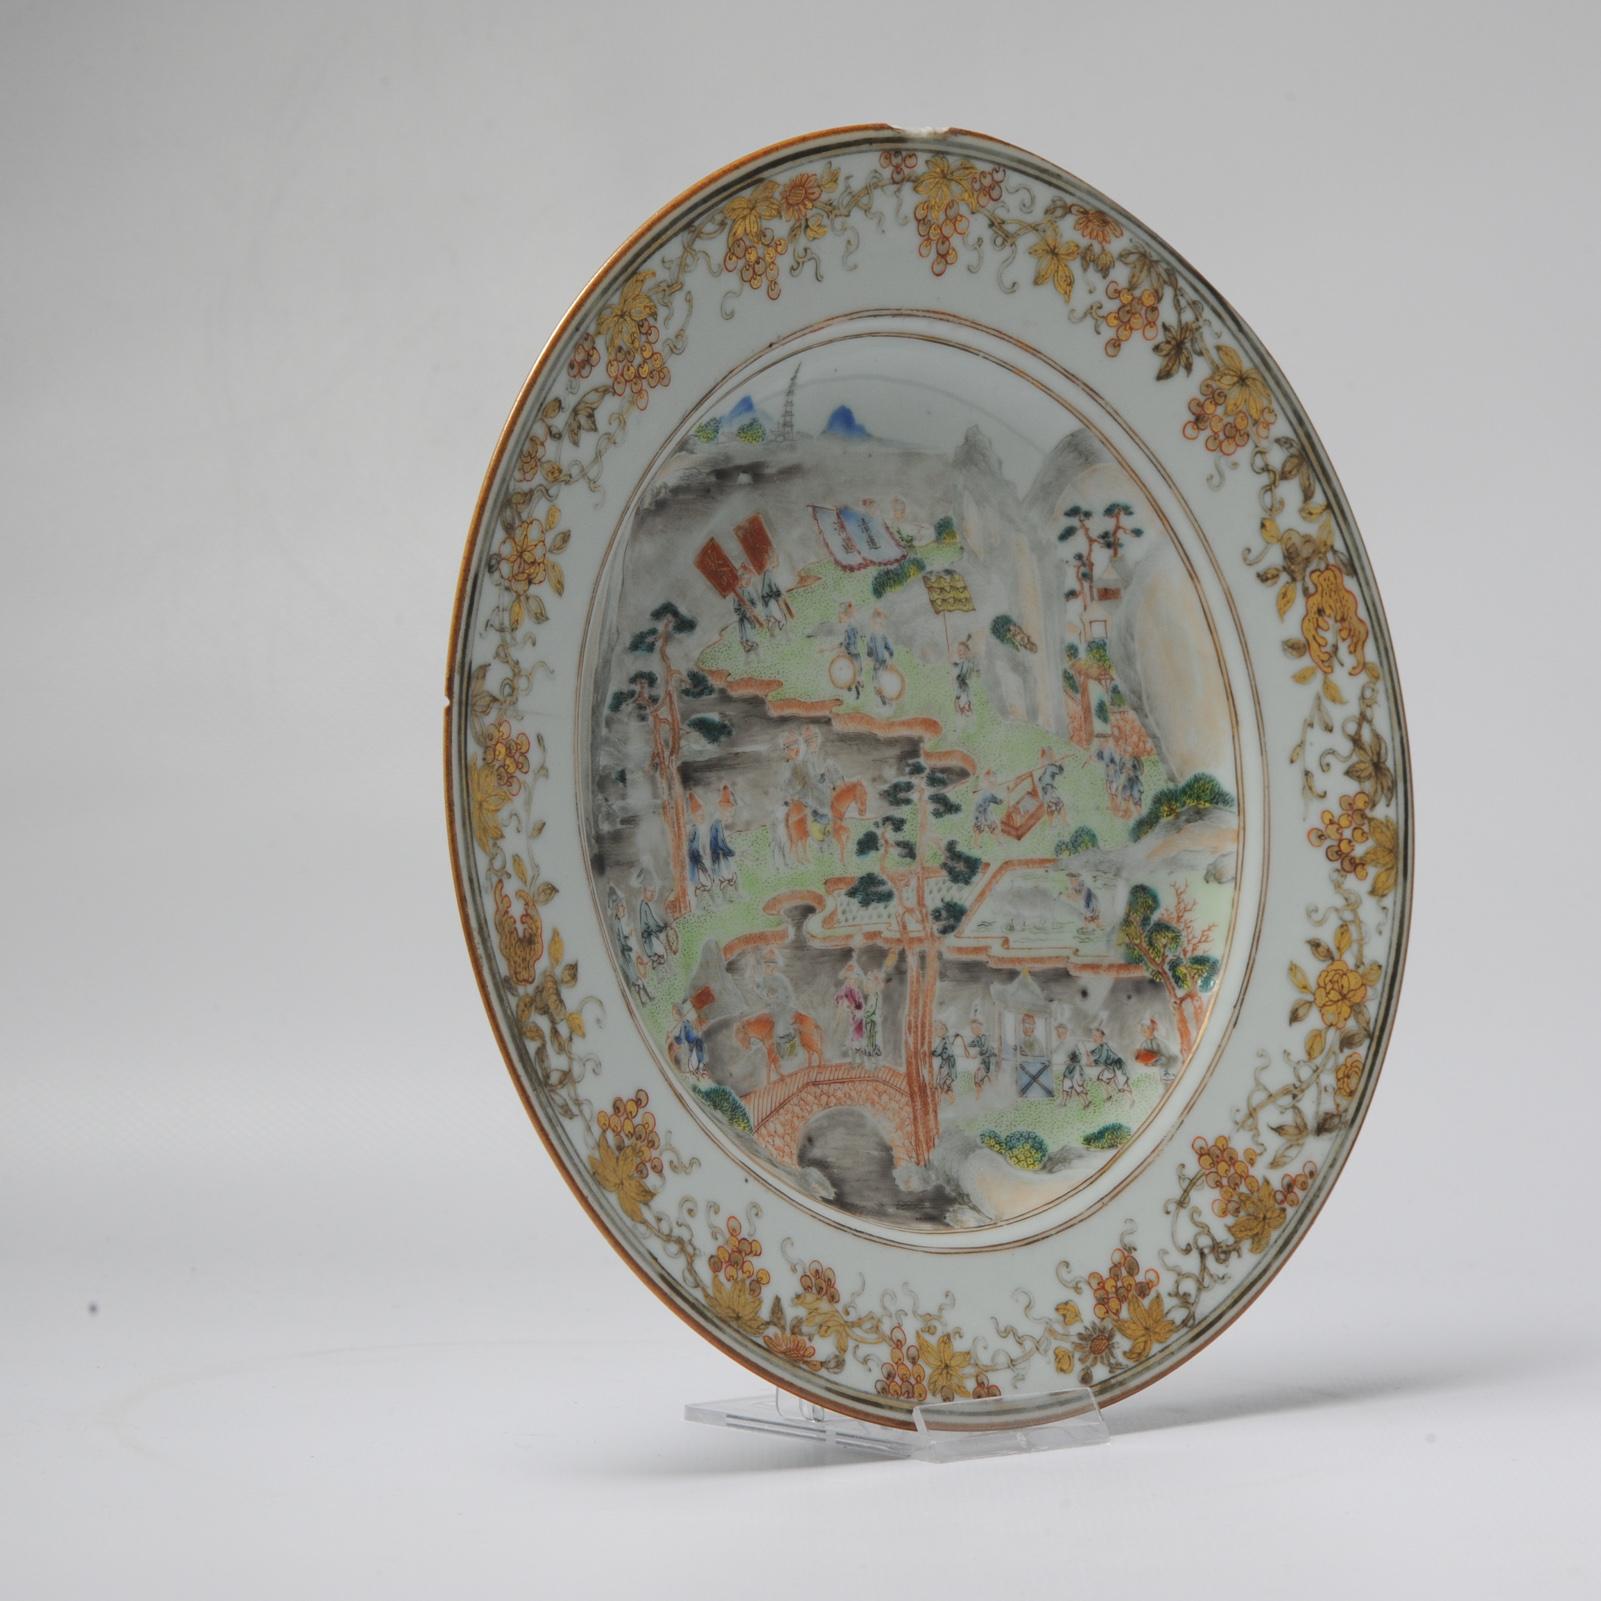 18th Century and Earlier Antique 18th C Chinese Porcelain Fencai Dish China Famille Rose Qianlong Period